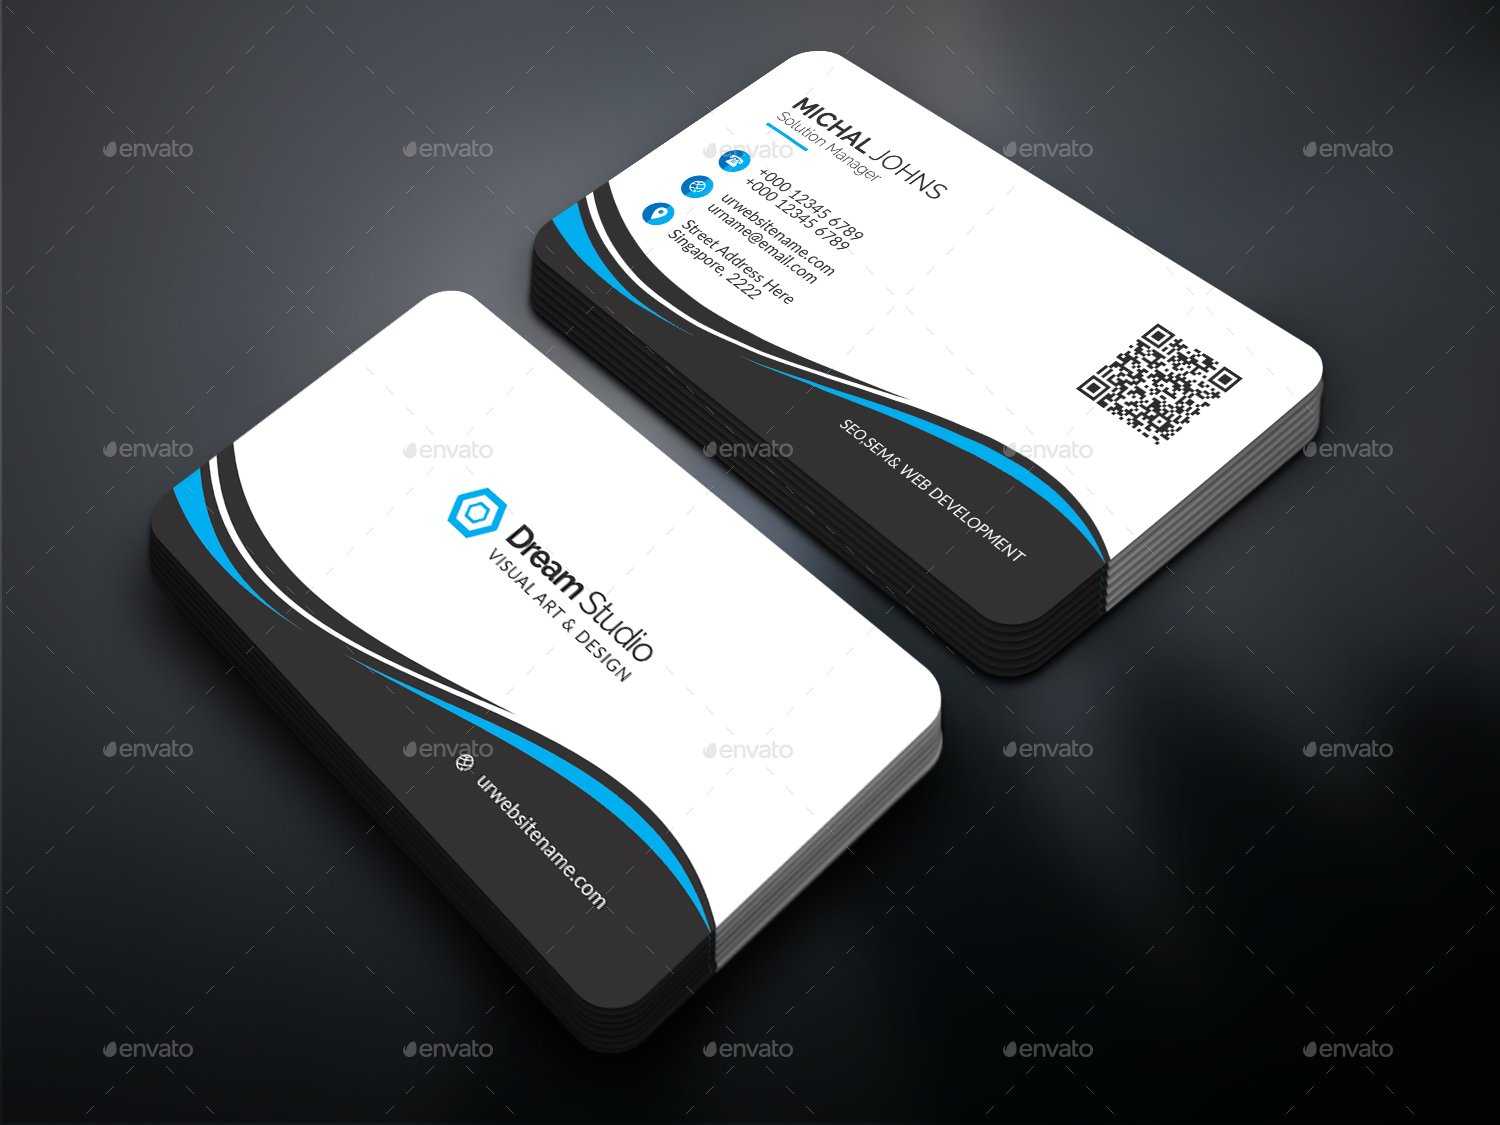 30 Free Psd Business Cards Templates For Powerful Business Within Visiting Card Templates Psd Free Download